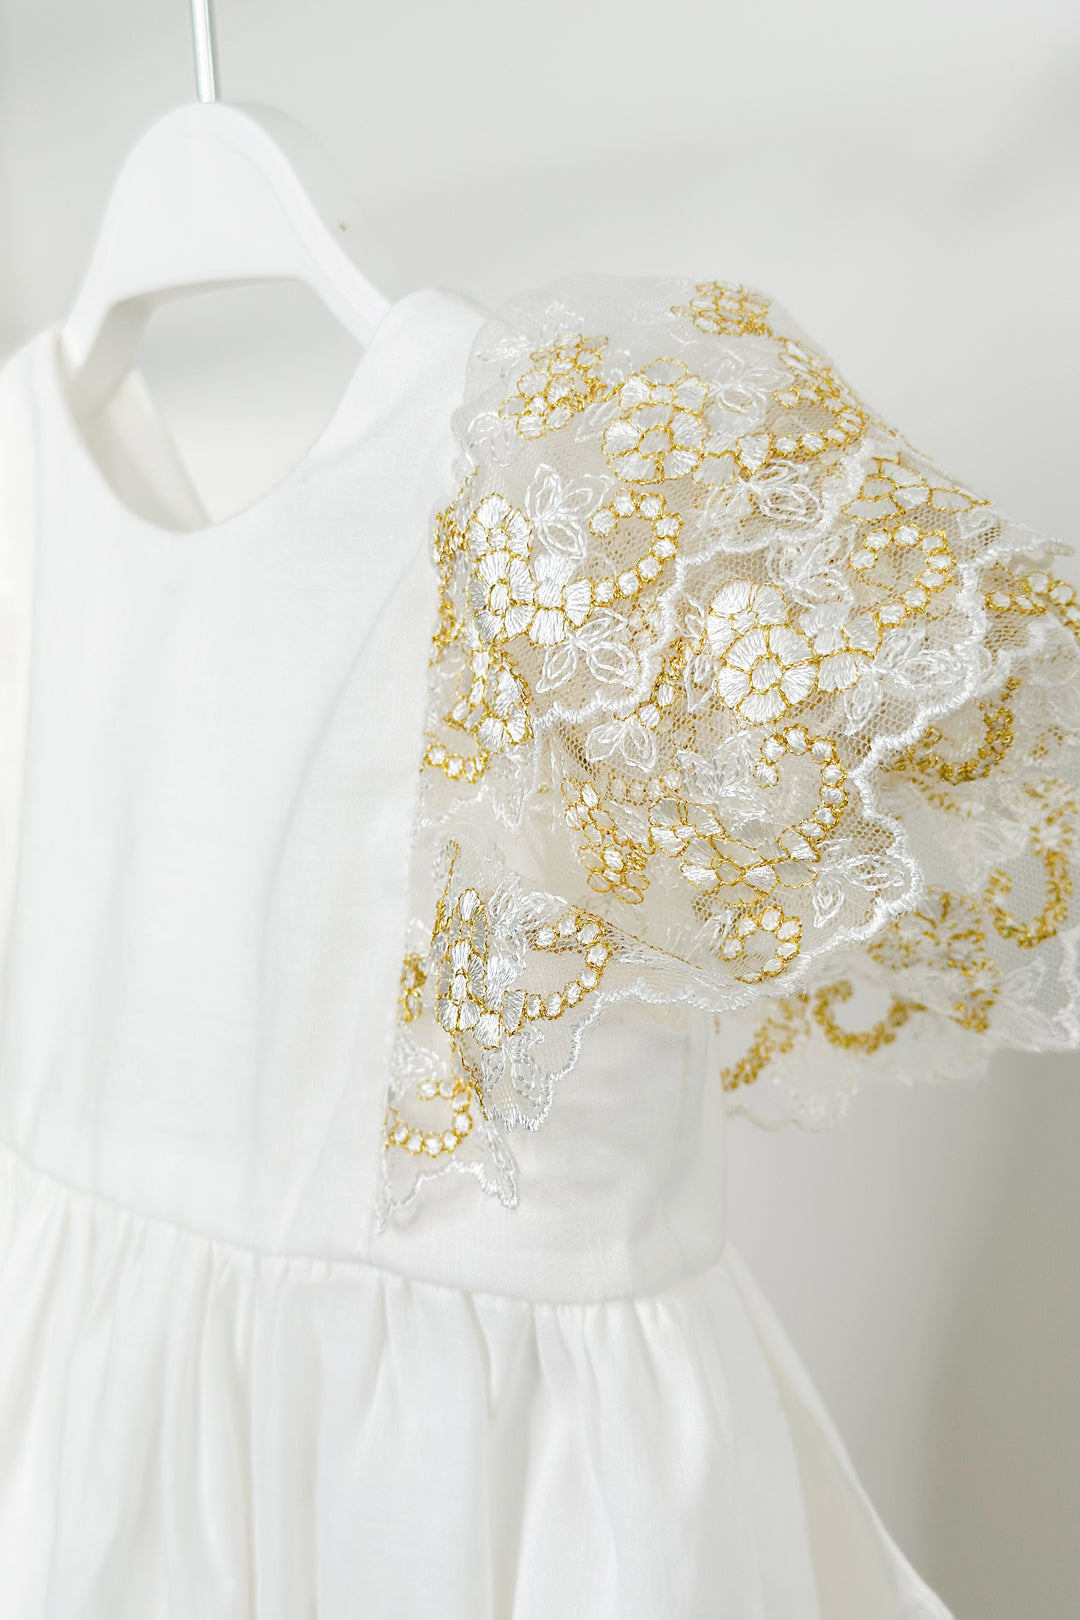 Fofettes "Alya" Ivory Gold Lace Sleeve Romper | Millie and John